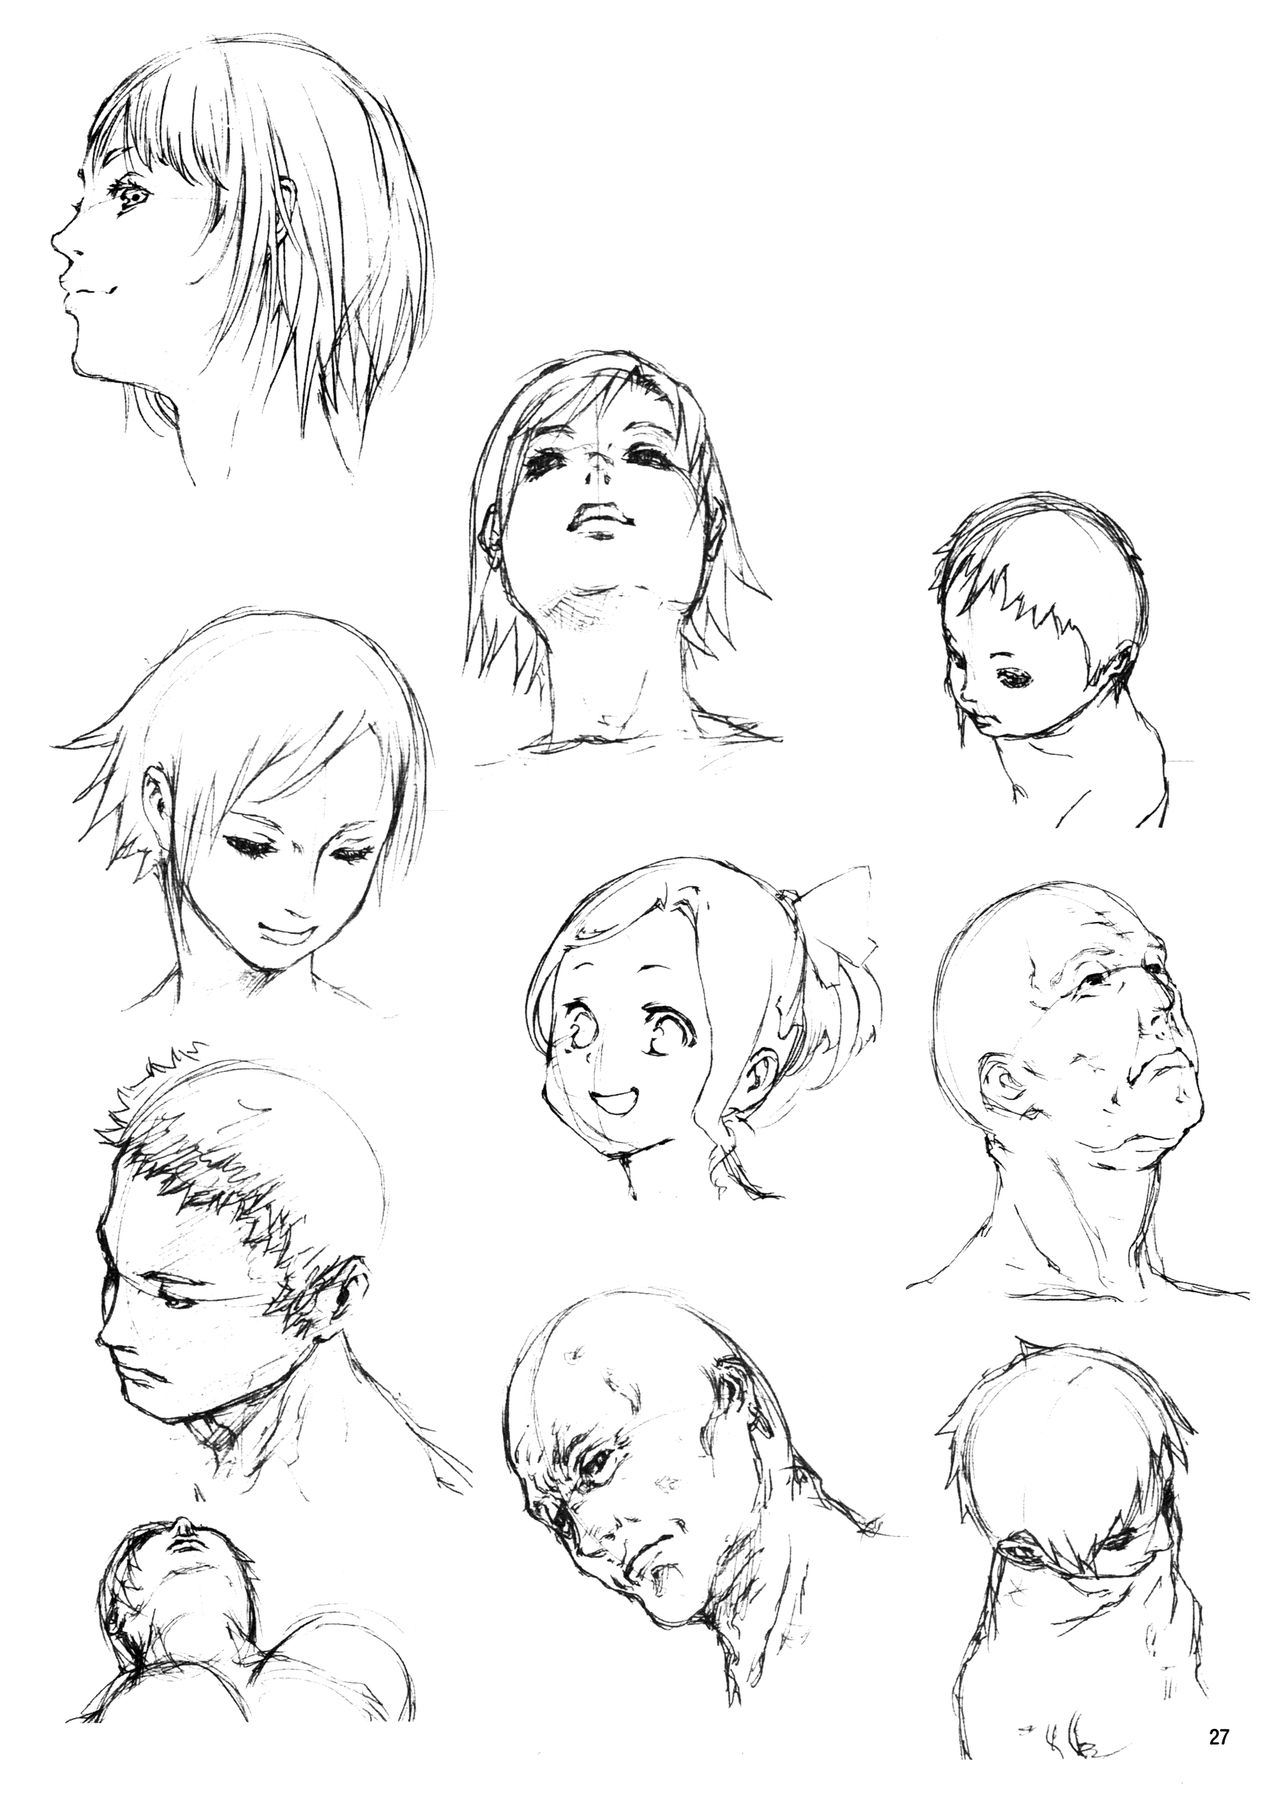 Sketching Manga-Style Vol. 3 - Unforgettable Characters 26